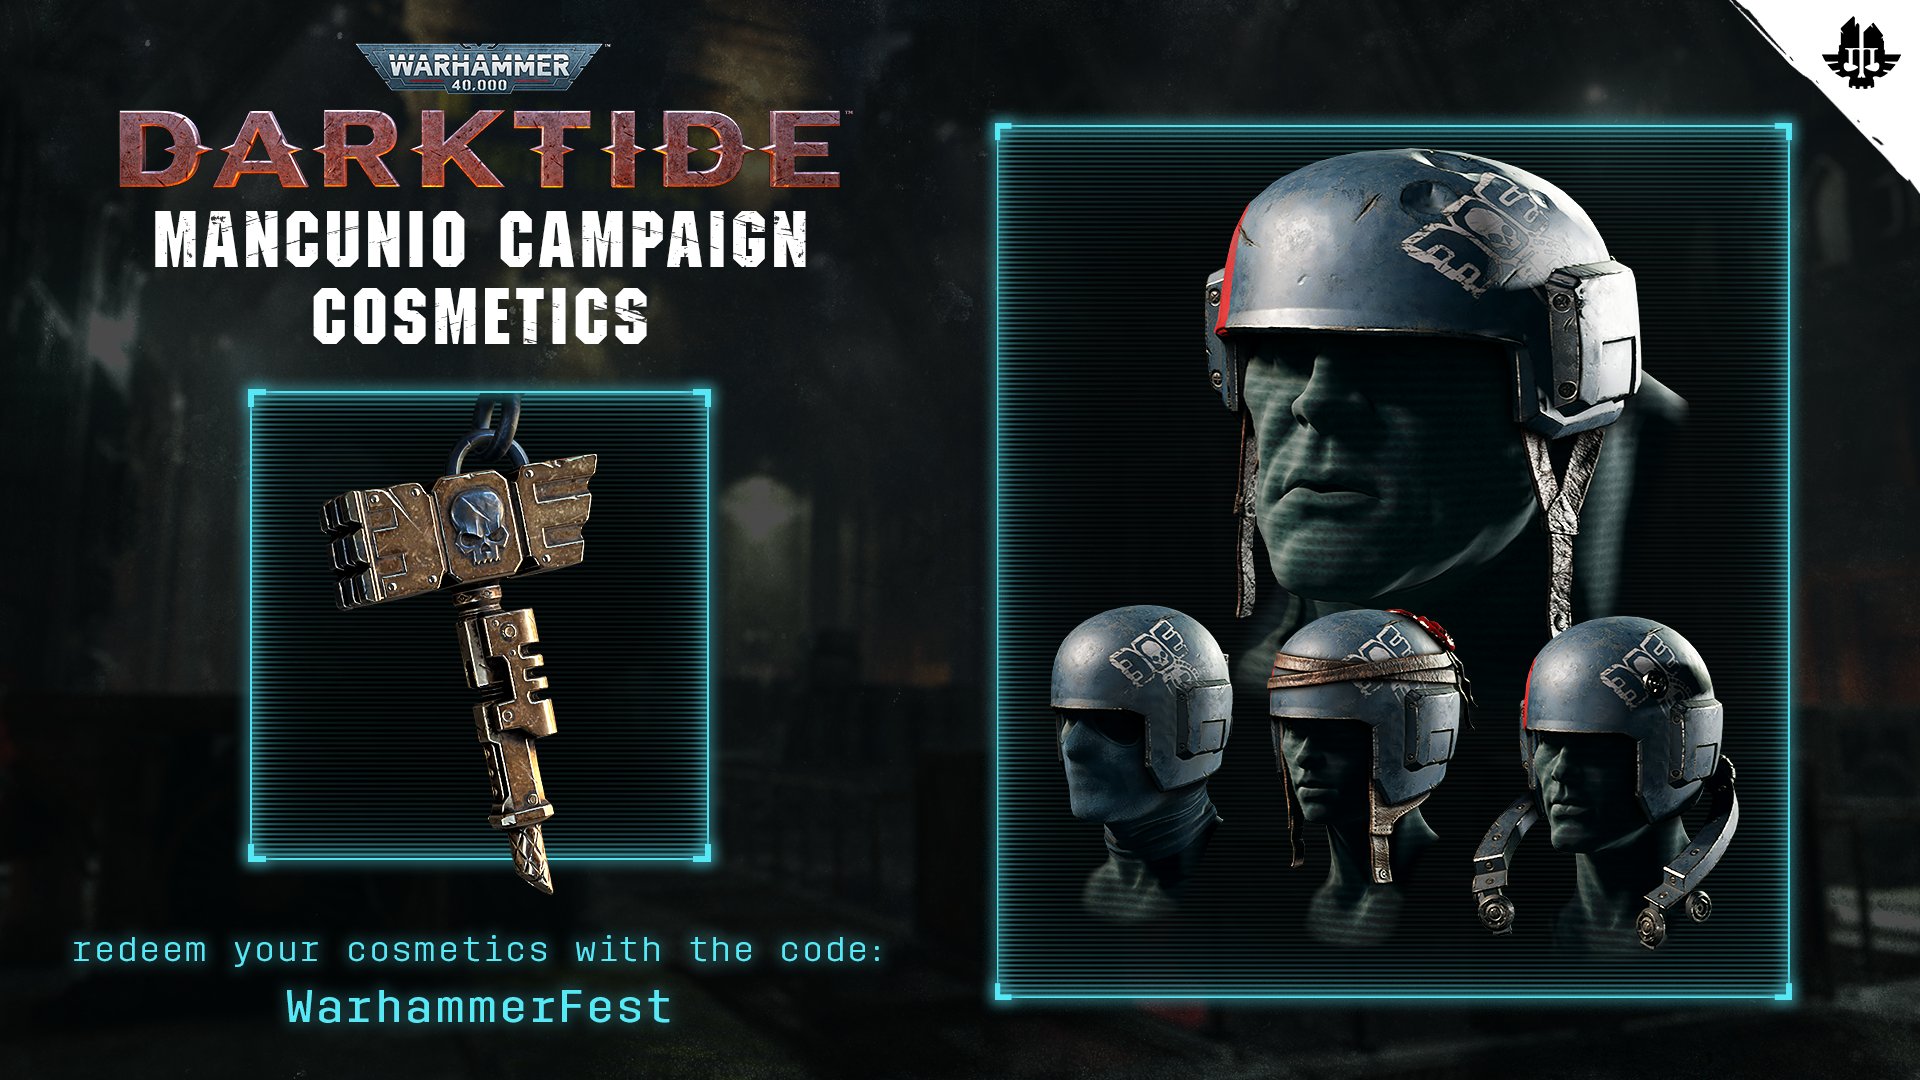 How to redeem Warhammer Fest cosmetics! image 1